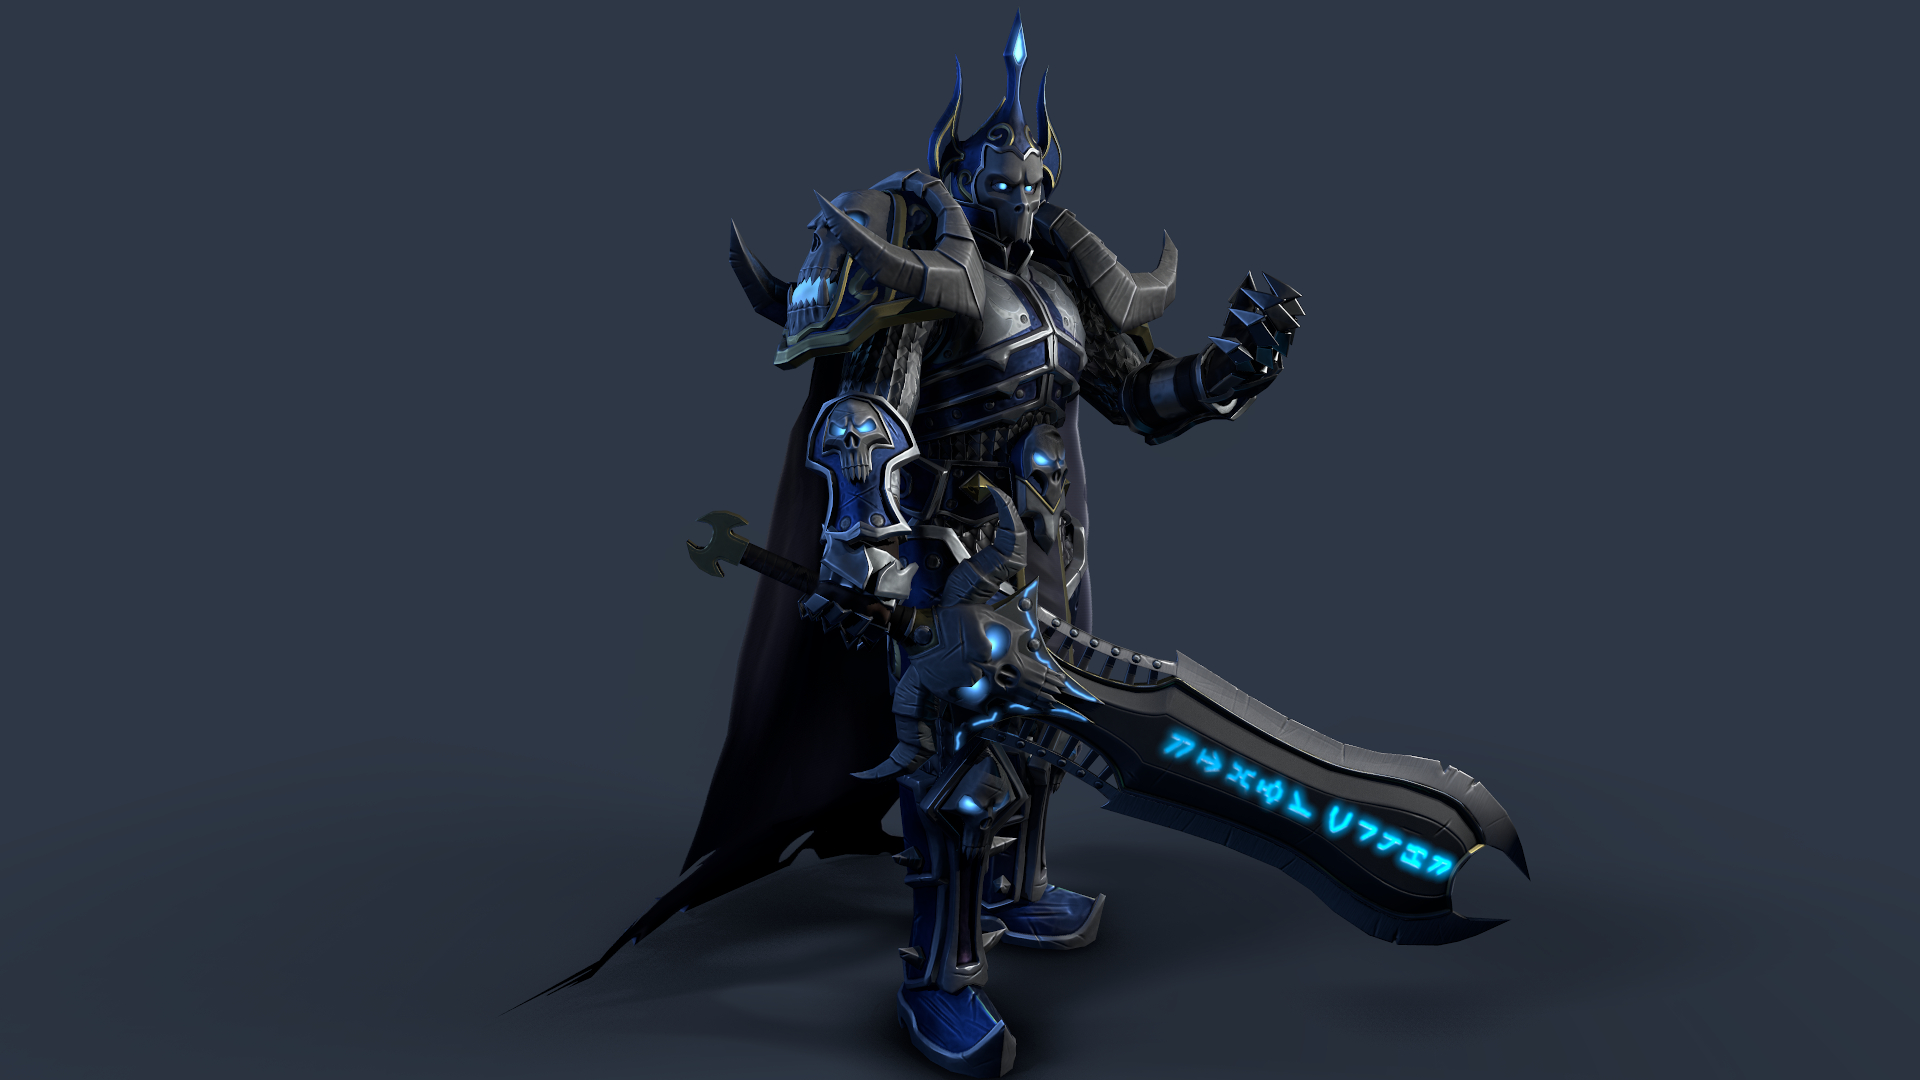 1920x1080 Death Knight inspired character by Arthas, WoW, Hots Finished Works Forums Cubebrush